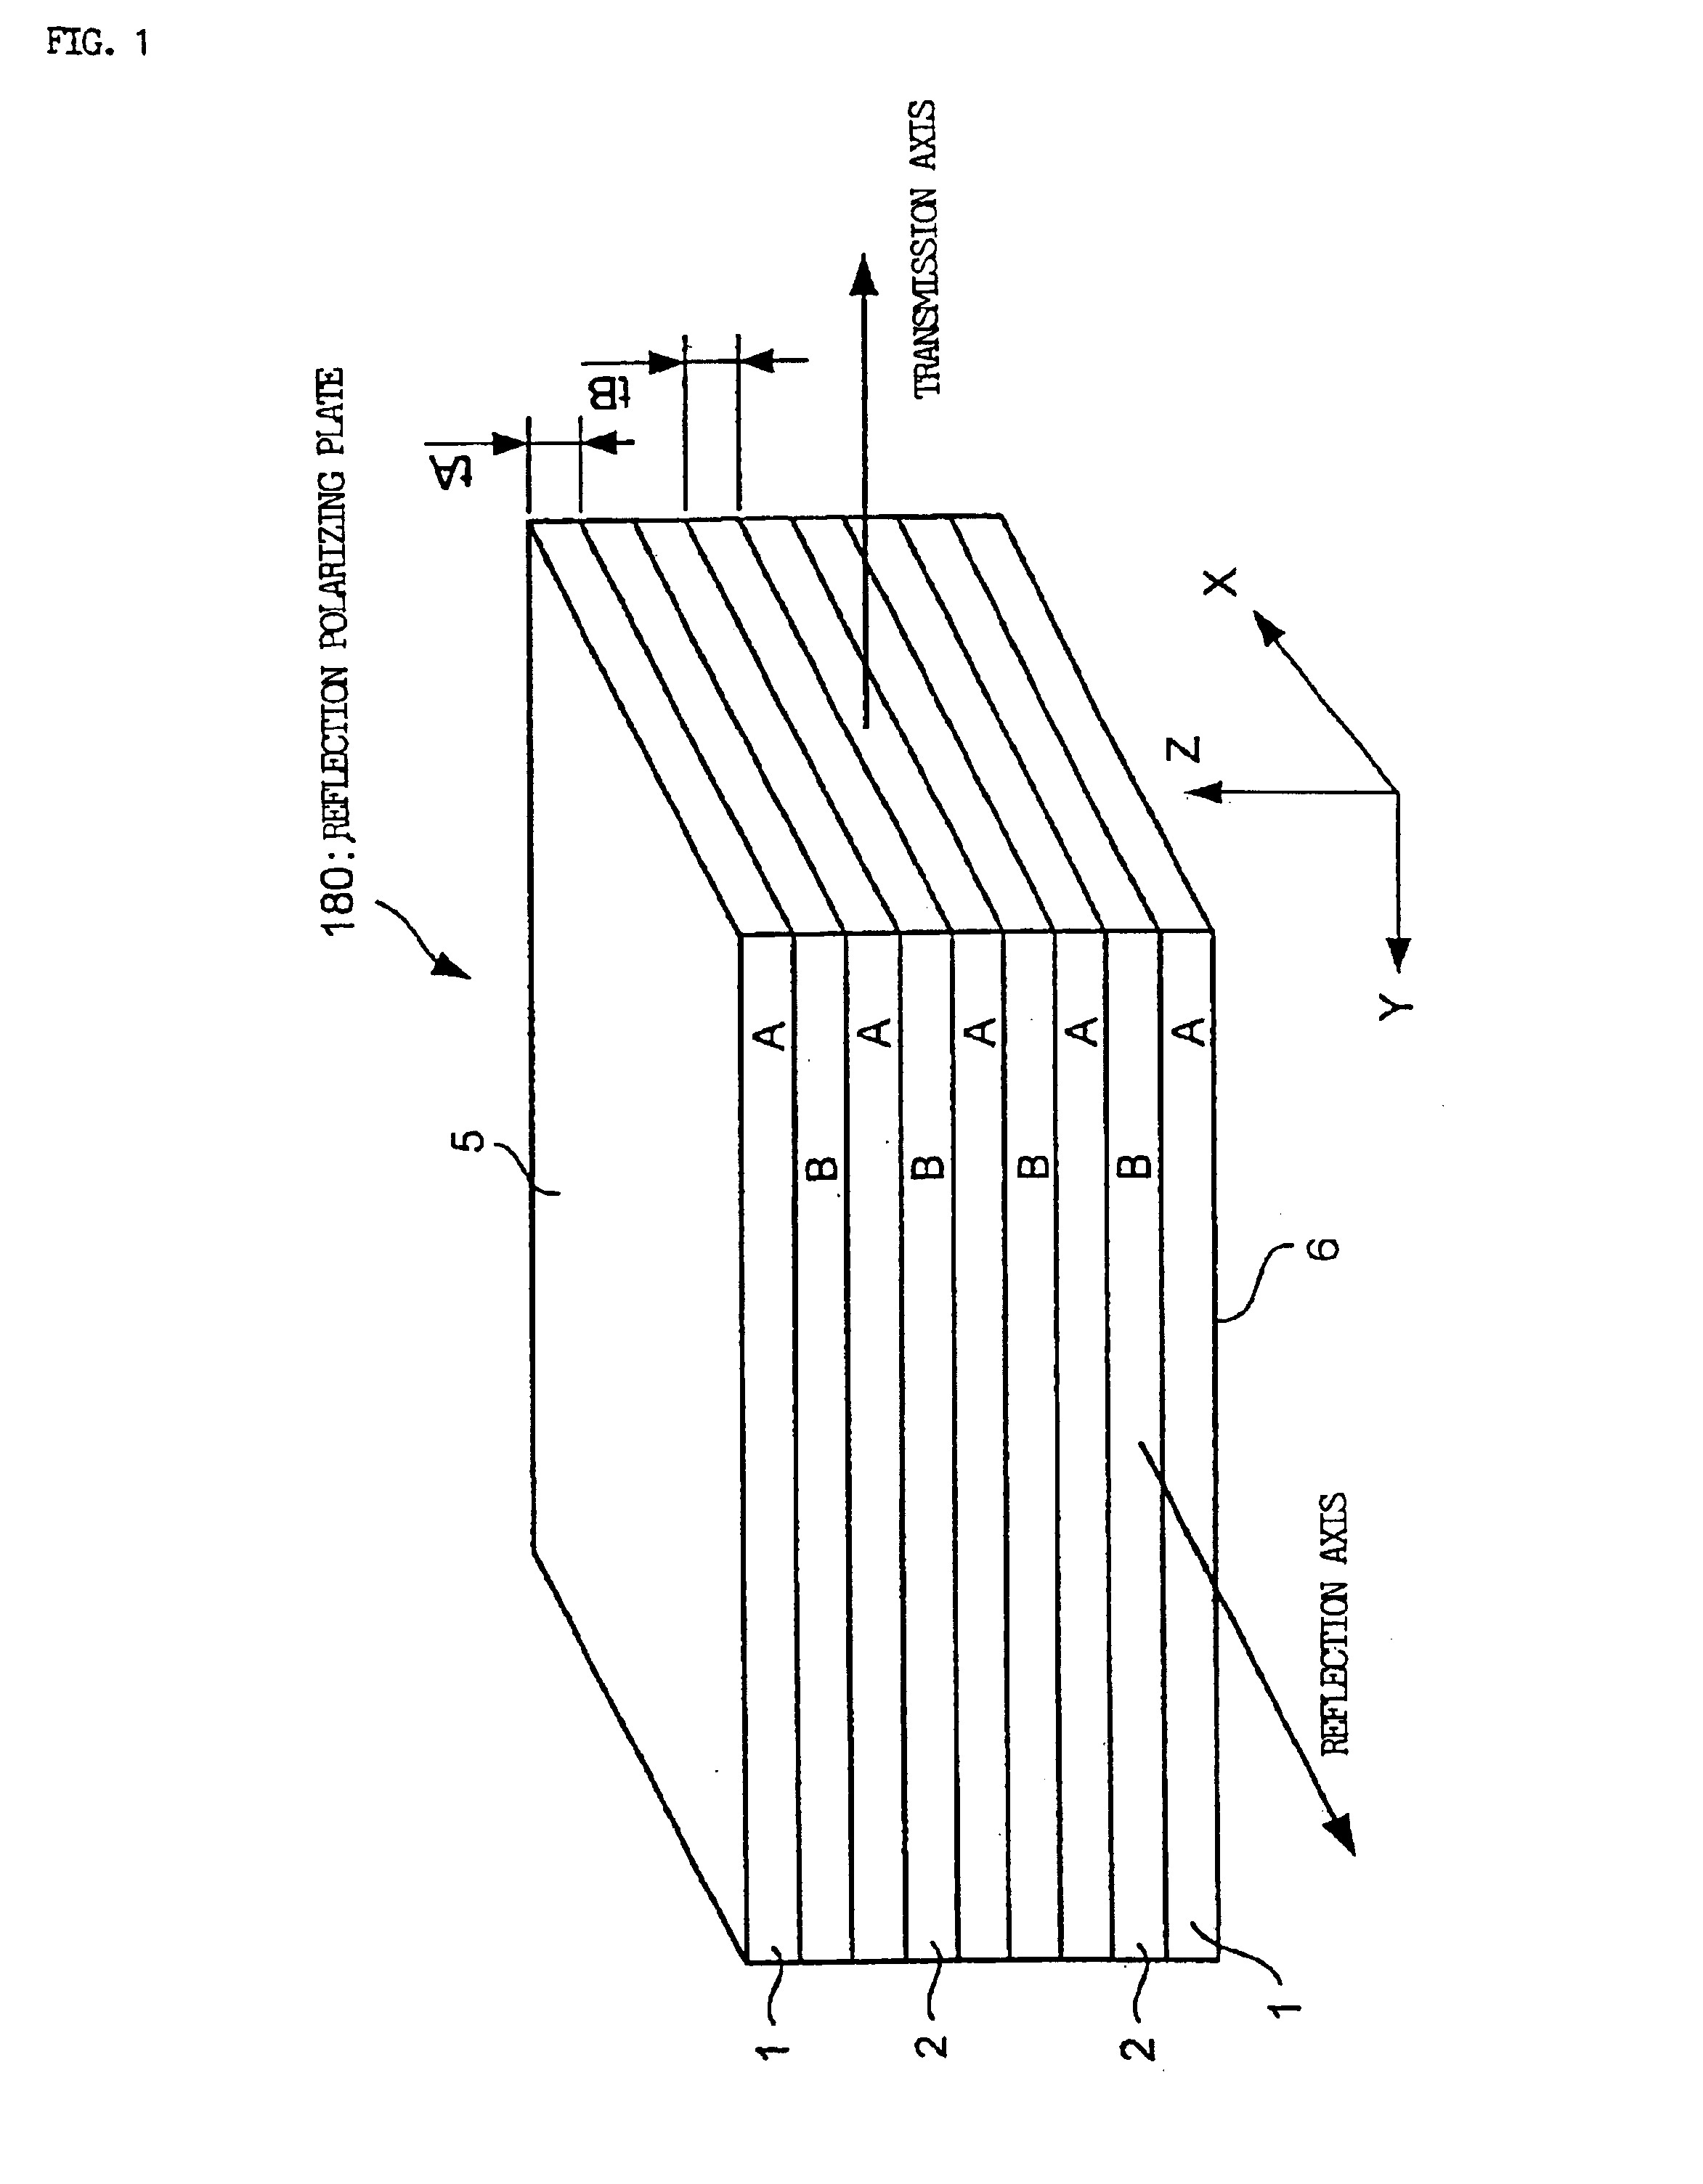 LCD with diffuser having particular haze value and diffuser-reflector distance, and reduced parallax